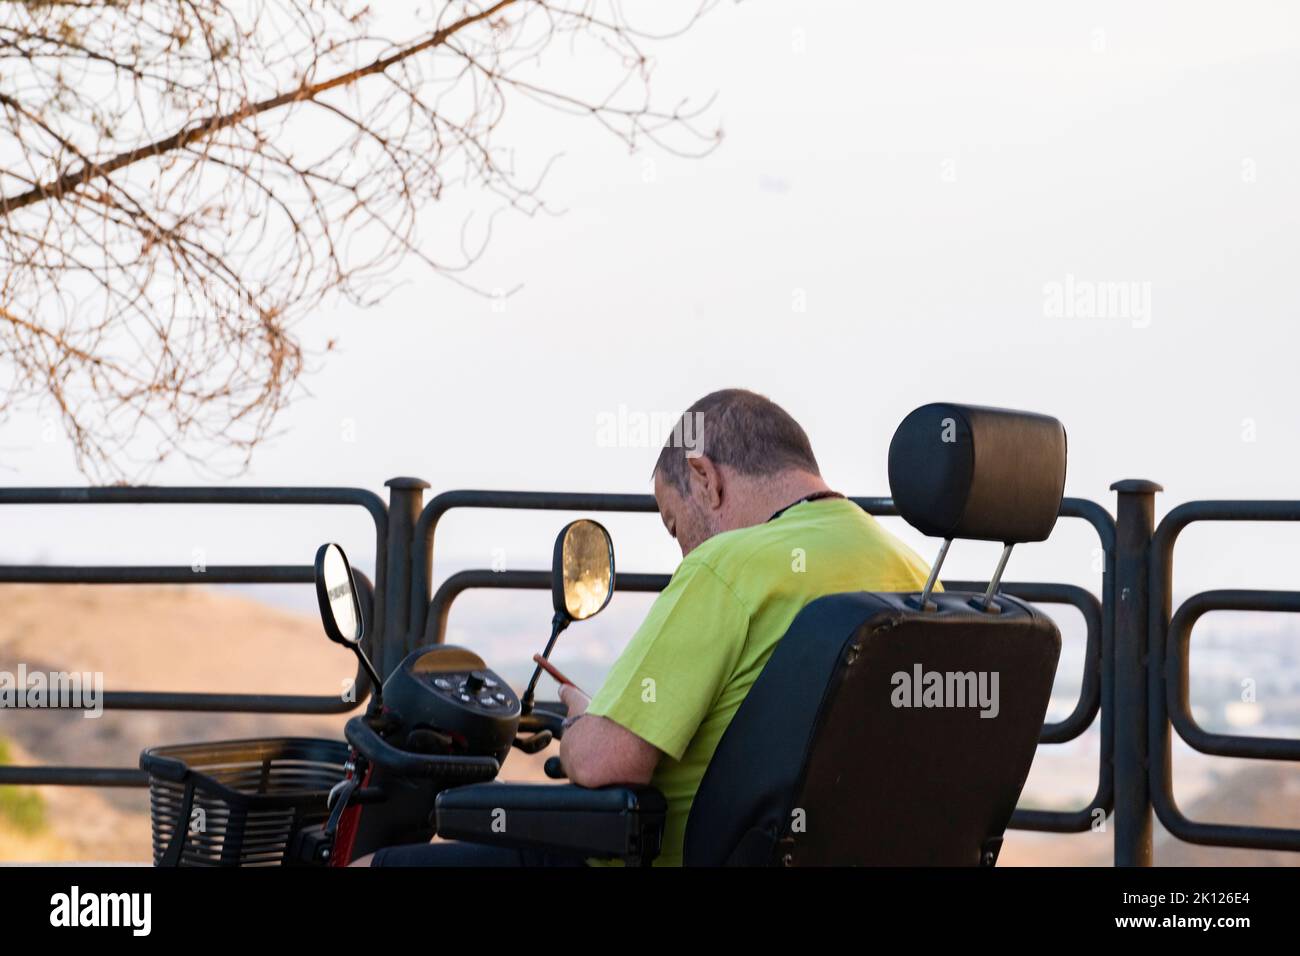 Disabled adult man is sitting in a motor-driven wheelchair on a viewpoint looking at his mobile phone.  Stock Photo